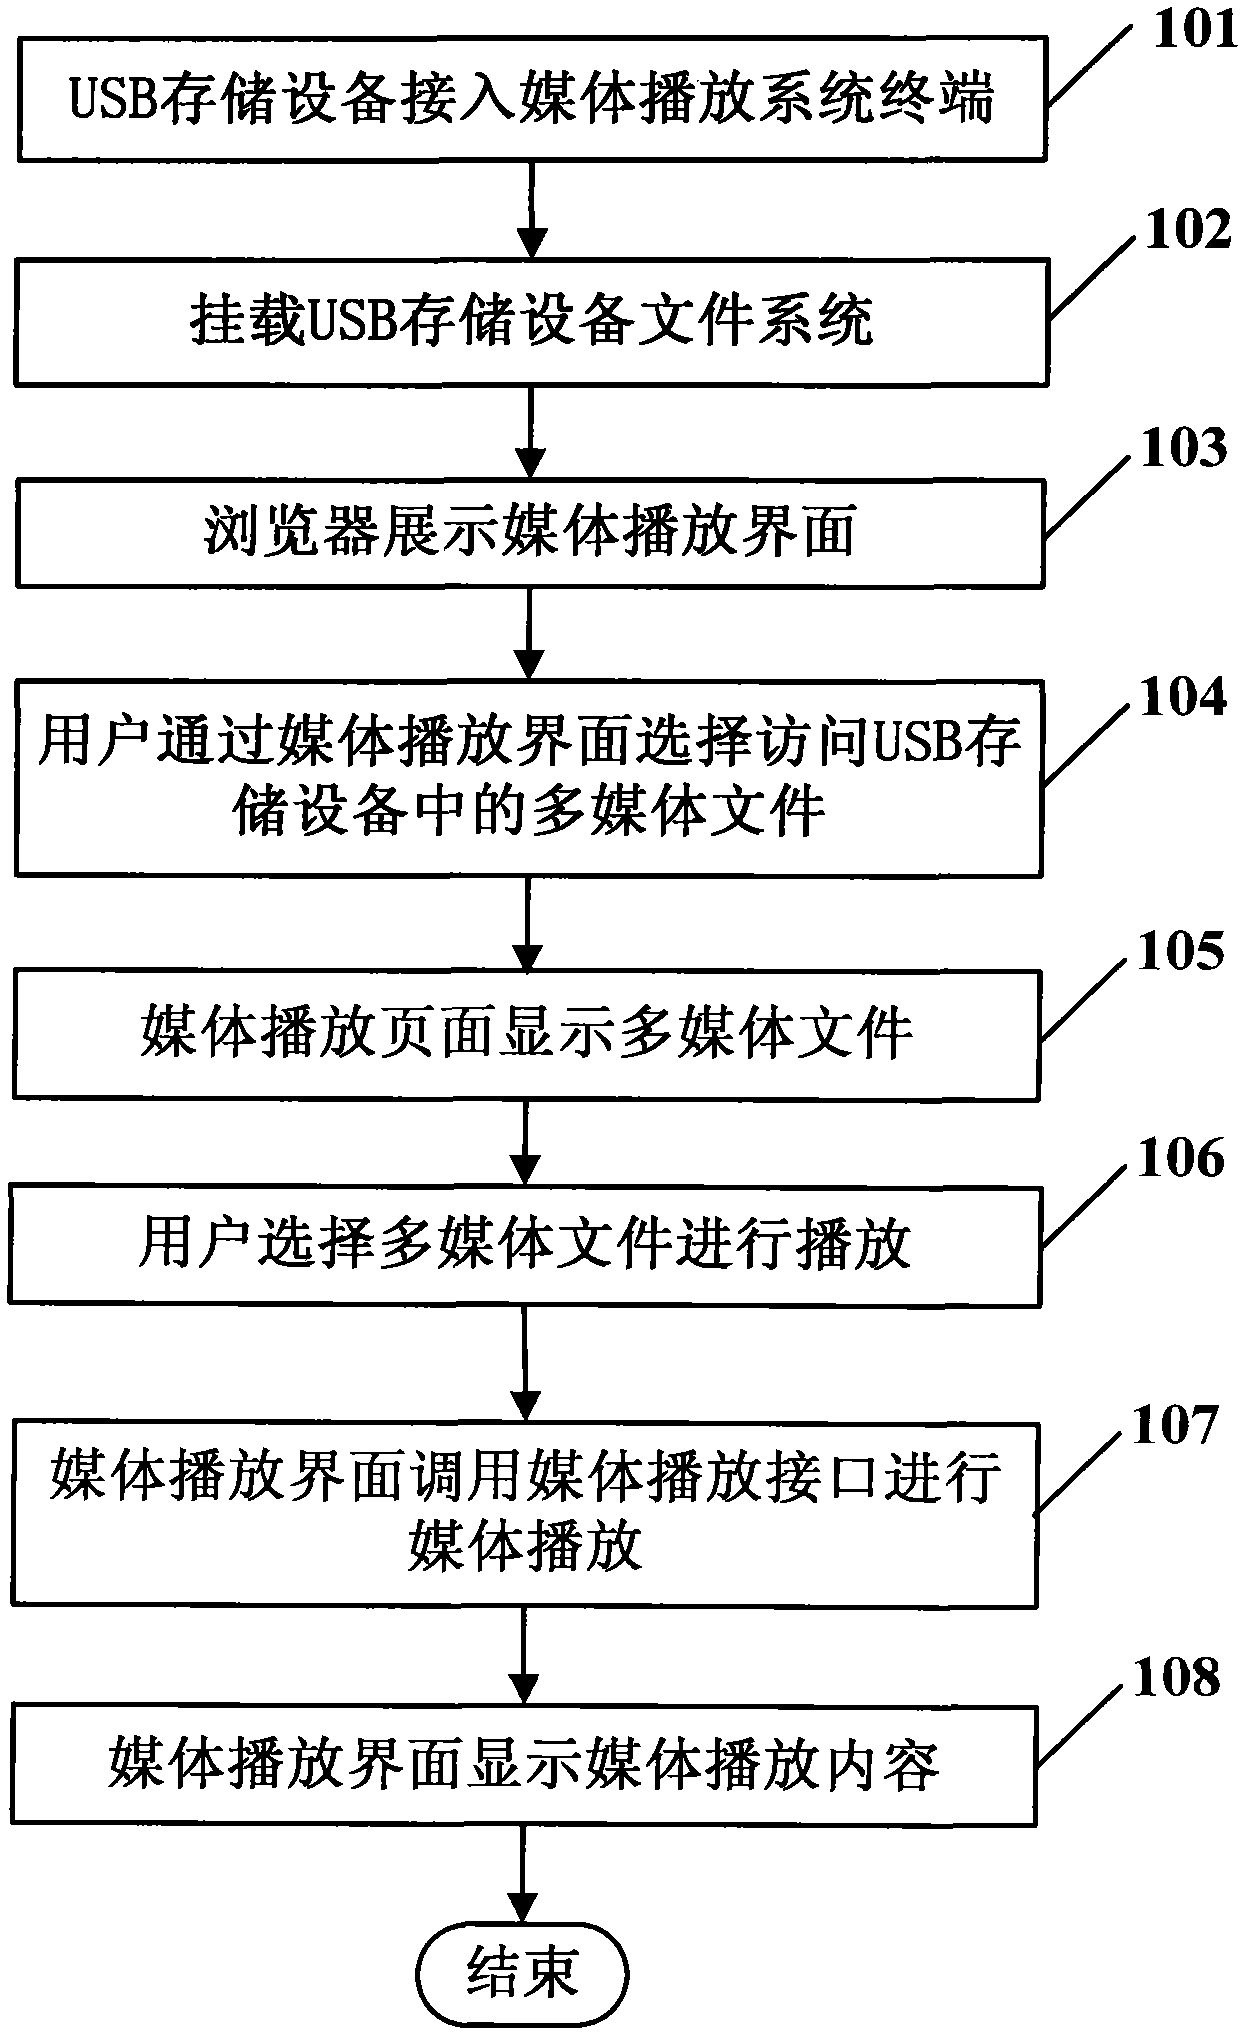 Browser-based media play system and method